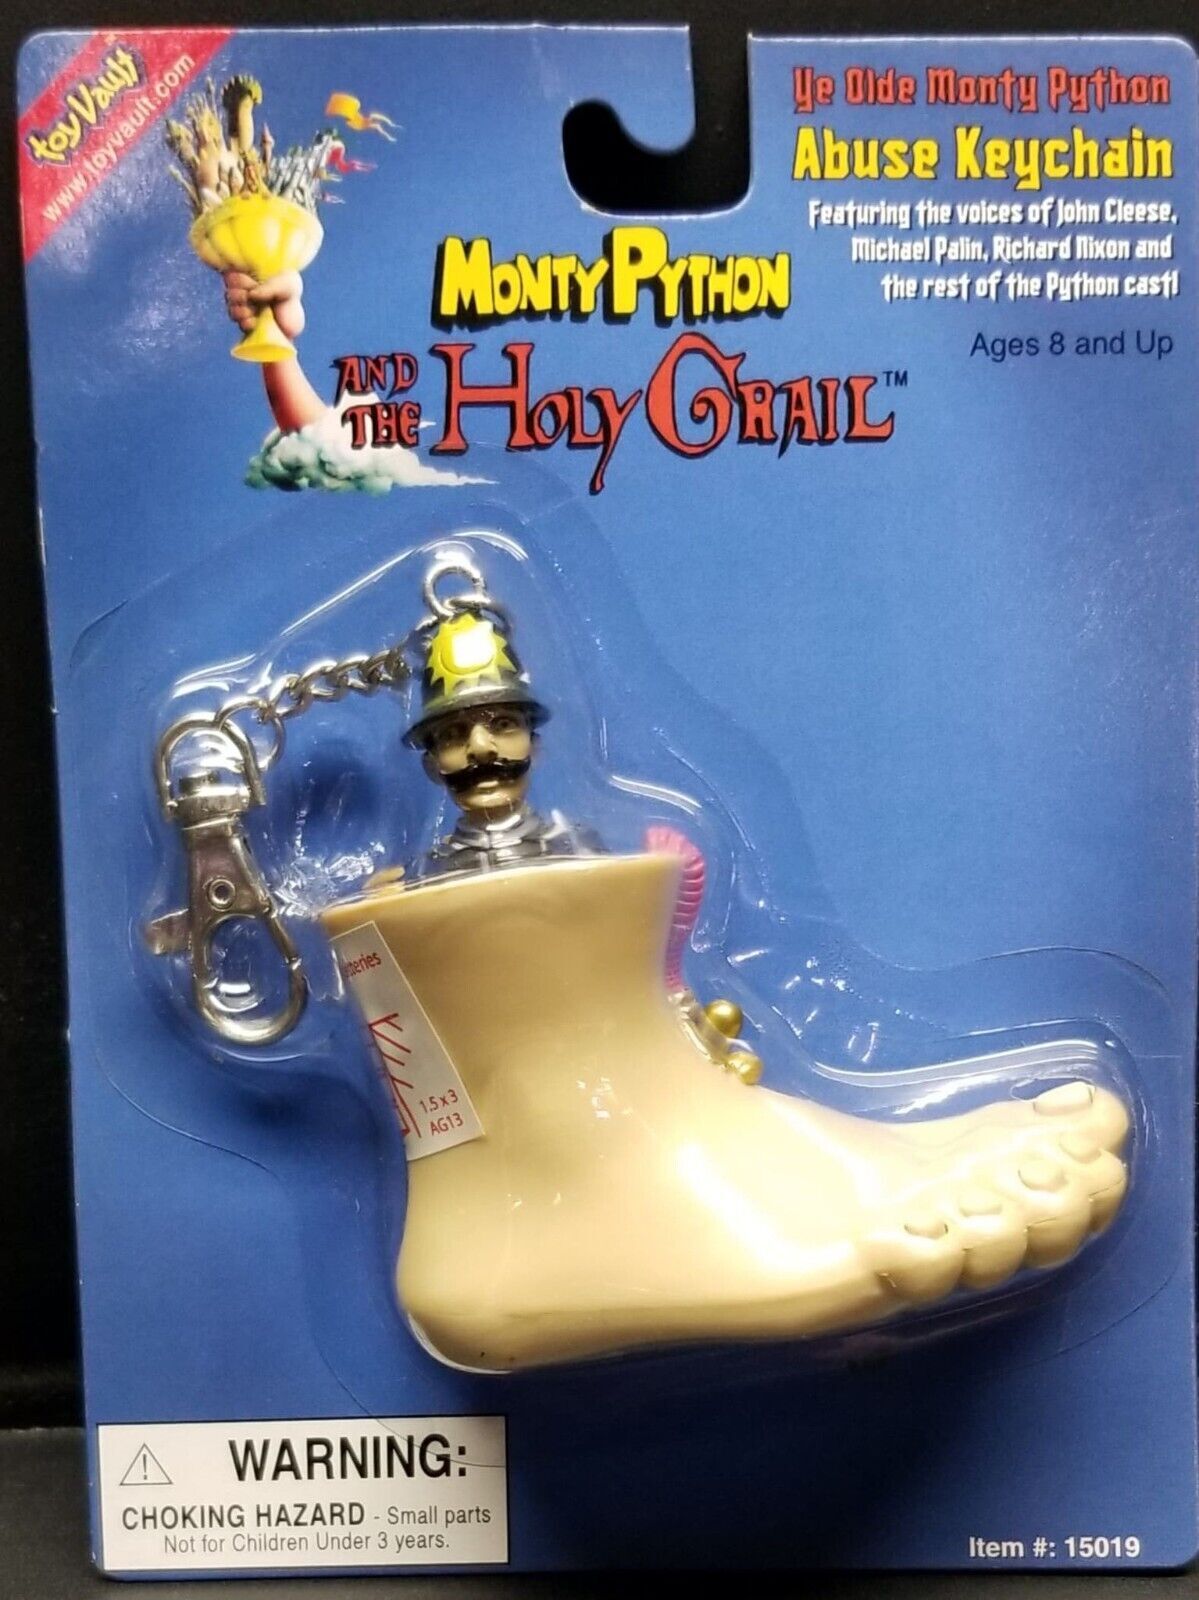 Monty Python and the Holy Grail Abuse Novelty Keychain NEW IN PACKAGE